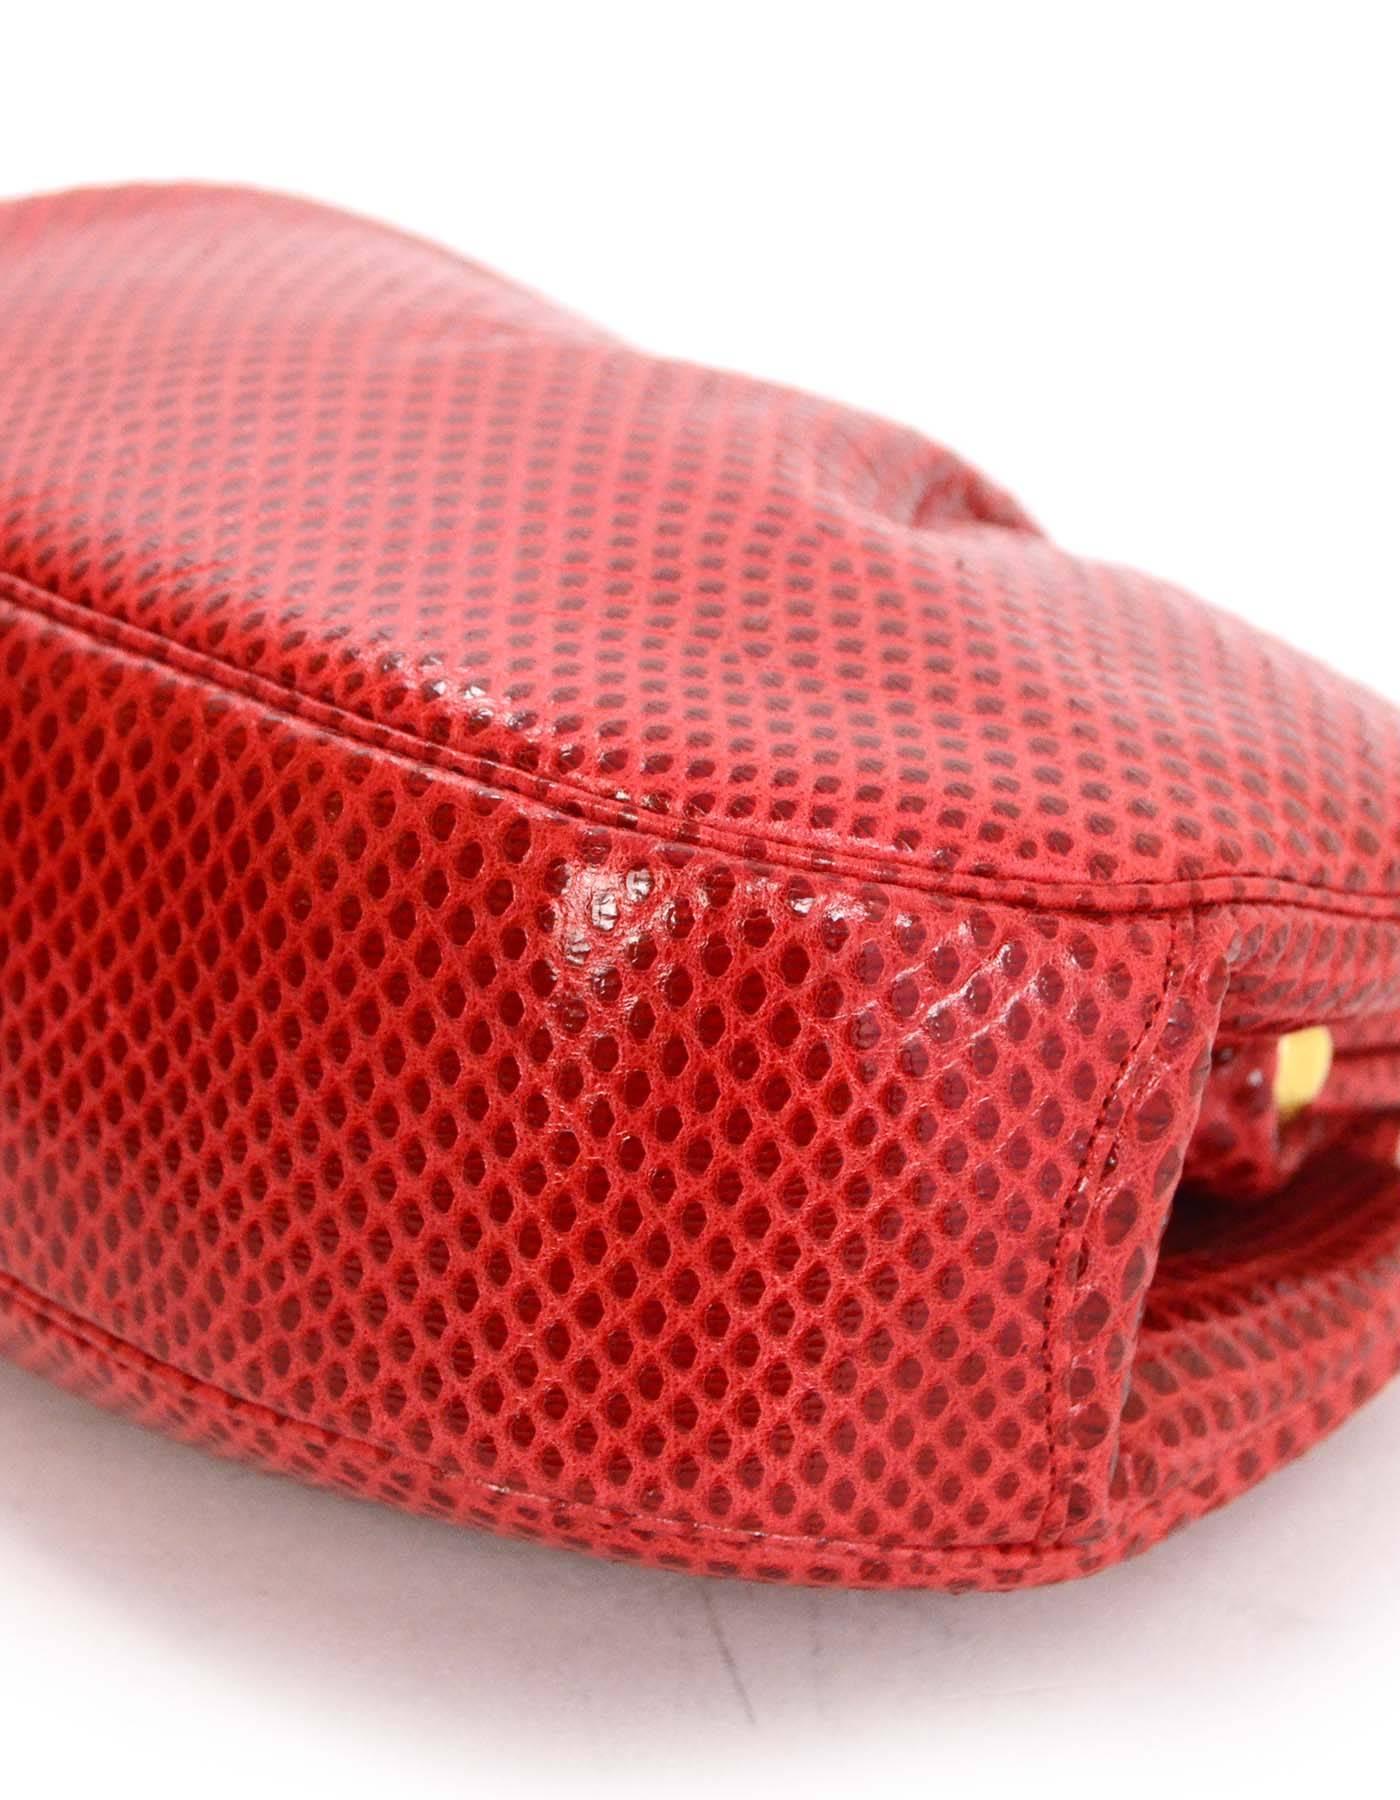 Judith Leiber Red Karung Snakeskin Clutch with GHW 1